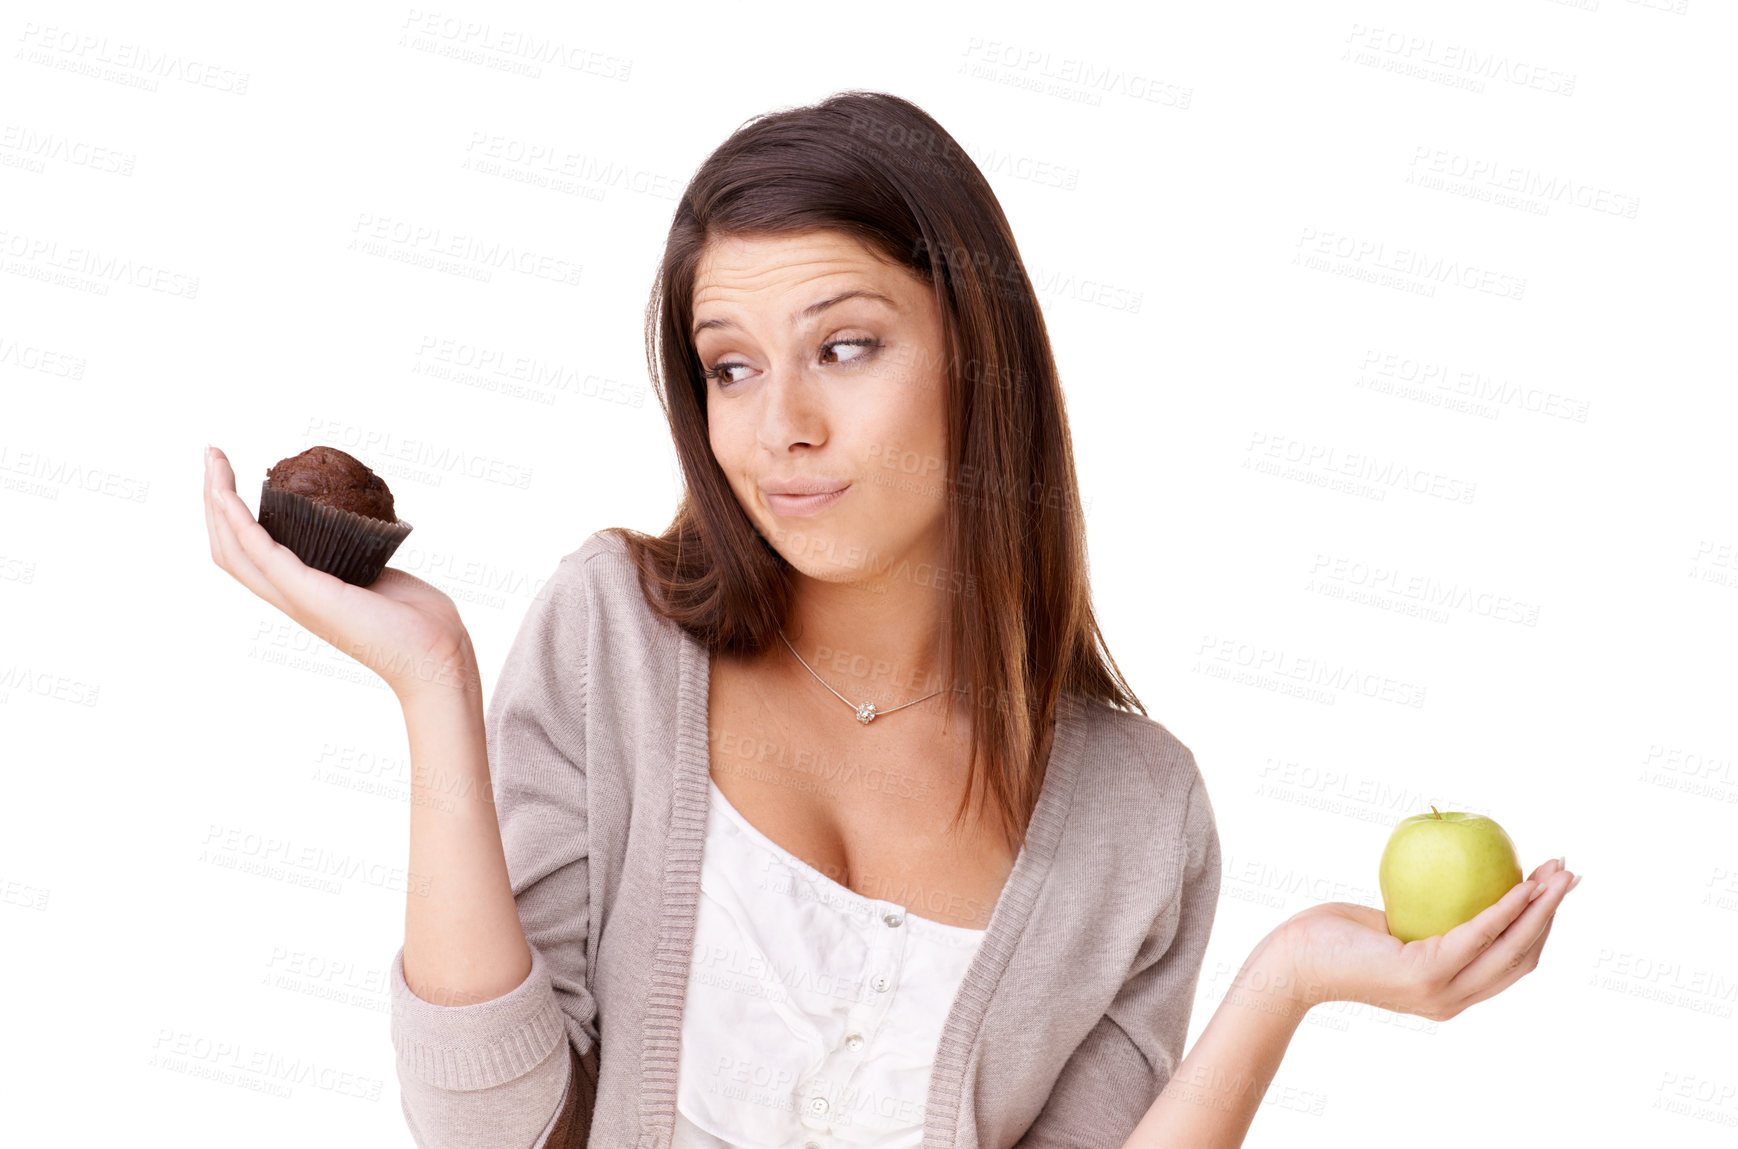 Buy stock photo Doubt, decision and apple or muffin with a woman in studio isolated on a white background for food choice. Unsure, diet or nutrition with a confused young person holding fruit and dessert options